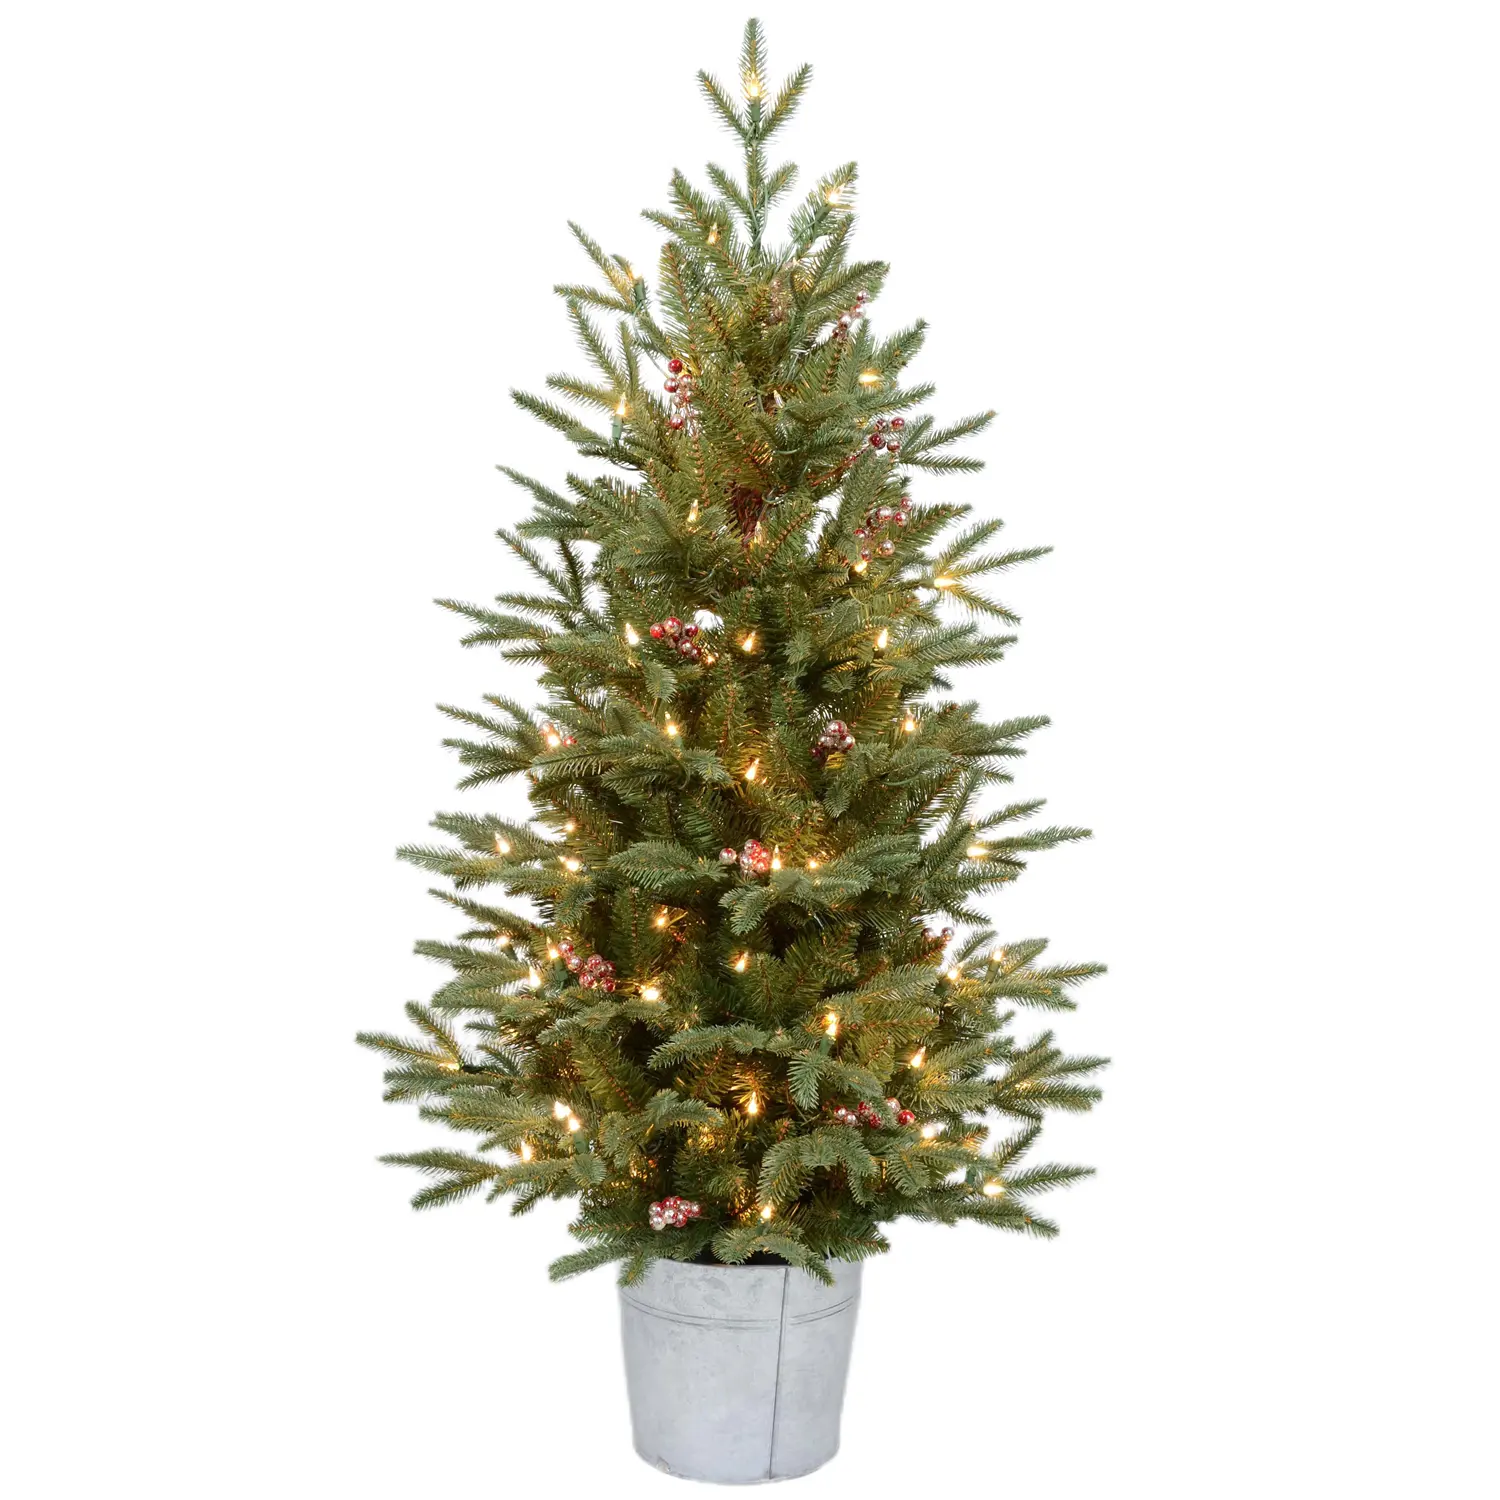 Household Indoor Christmas Decoration Supplies Mini Festival Artificial White Christmas Tree